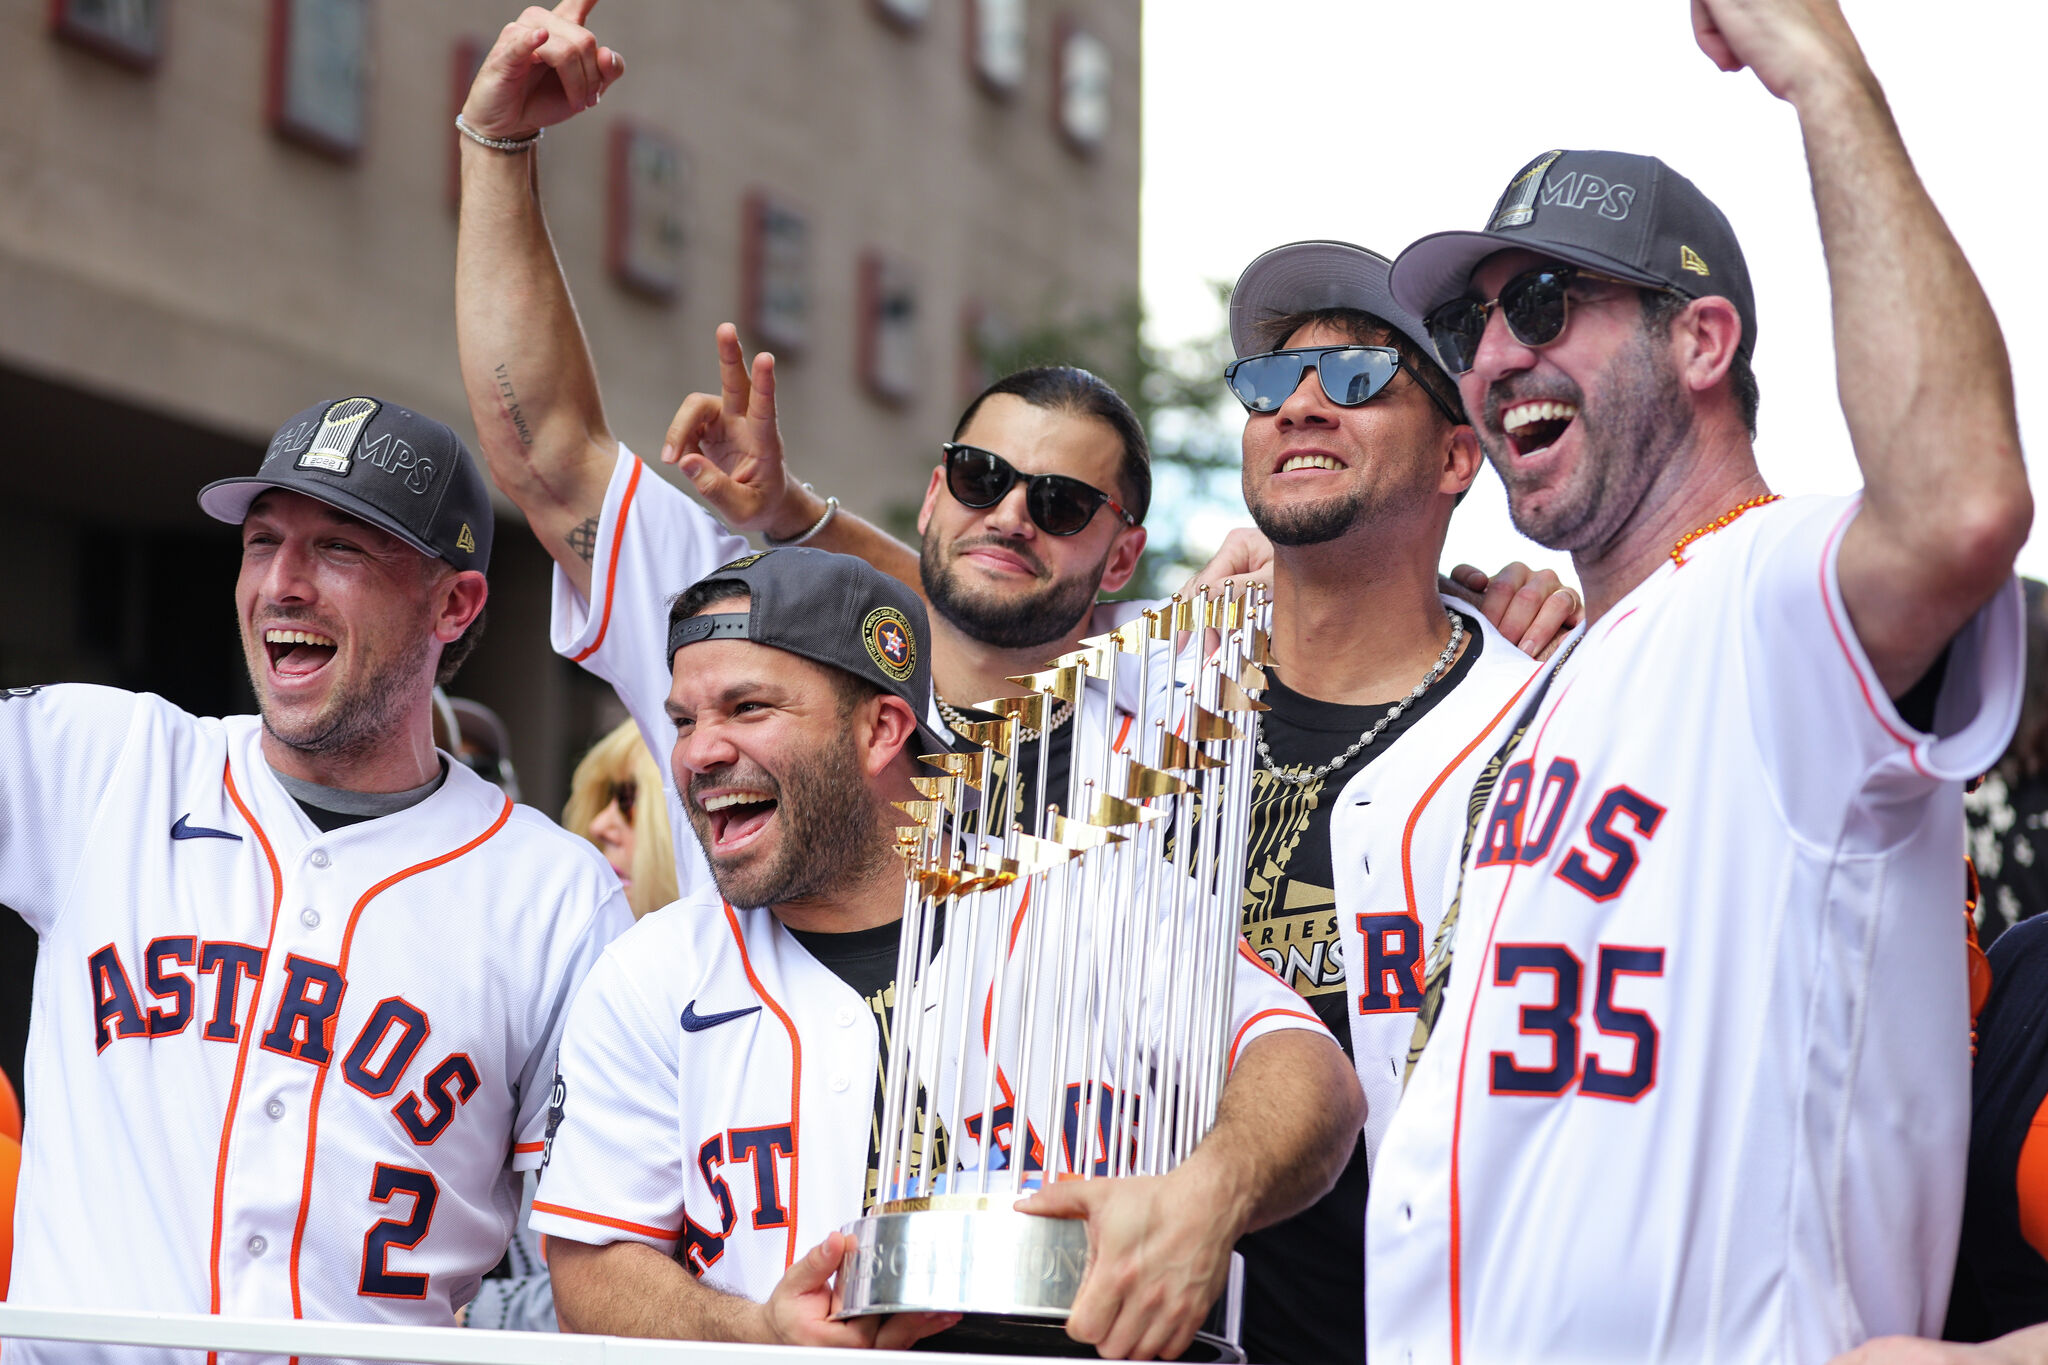 Astros World Series Champions 2022 Shirt, Altuve Astros Shirt, Gifts for  Houston Astros Fans - Happy Place for Music Lovers